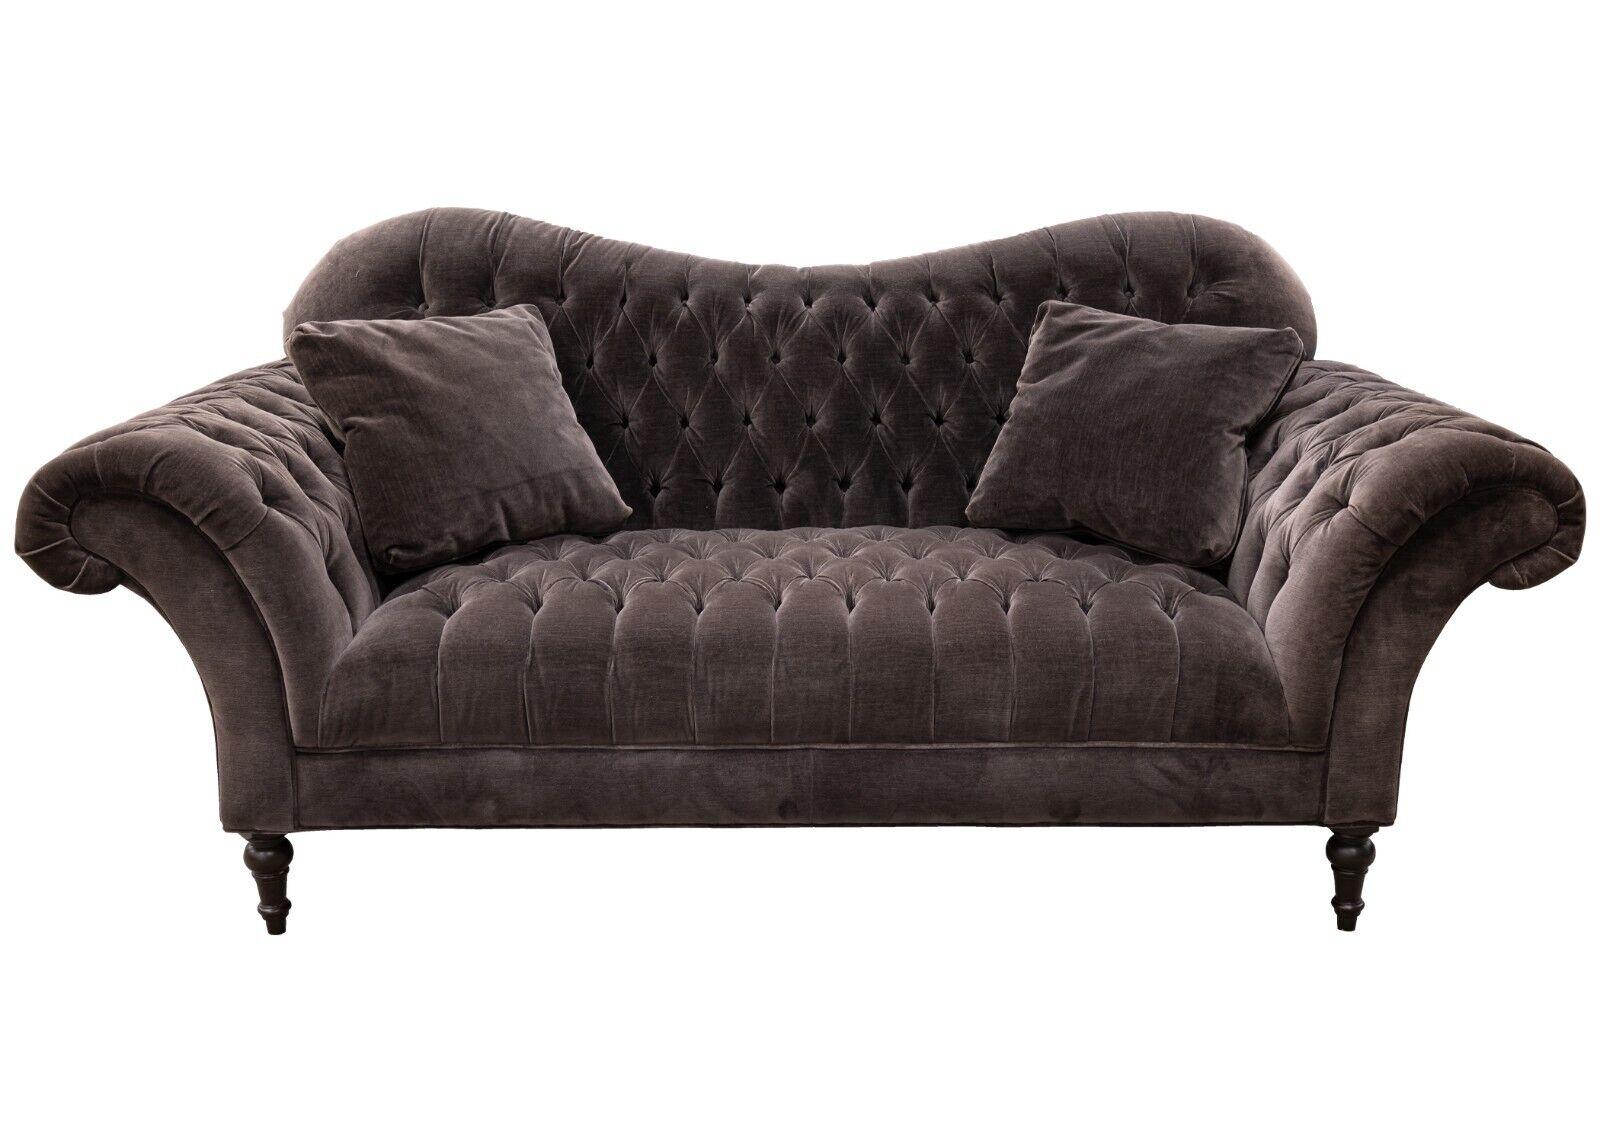 A Hollywood regency style tufted grey velvet sofa. This luxurious piece is iconic of the Hollywood regency style. It is made with a gorgeous grey / violet / slate (depending on the person and lighting) velvet upholstery. This piece has a silhouette